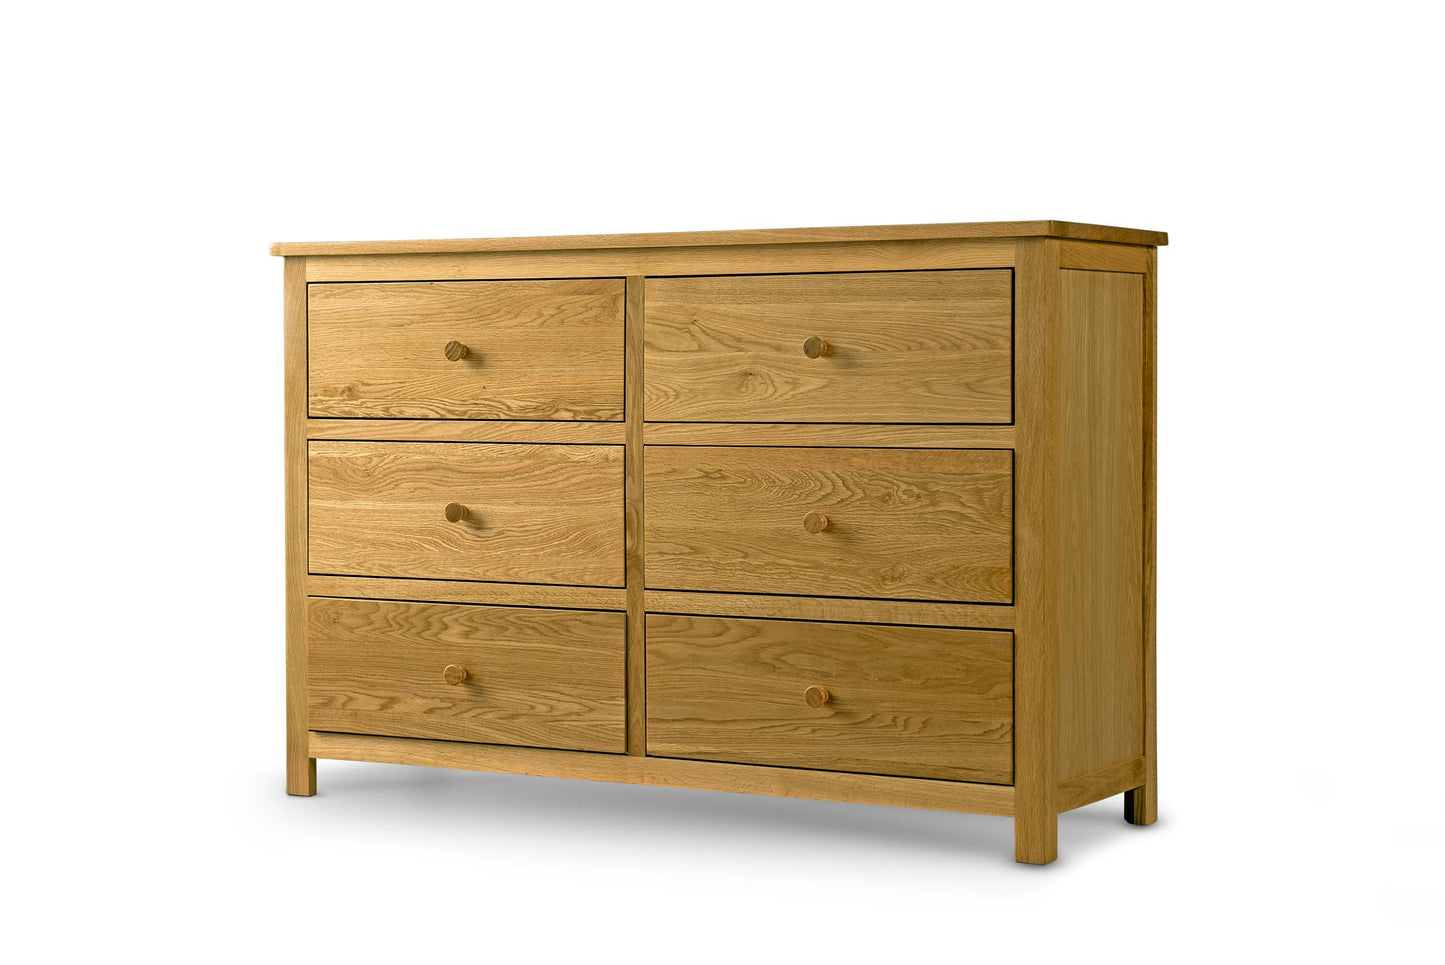 6 Drawer Chest of Drawers - Standard Style - Natural Oak